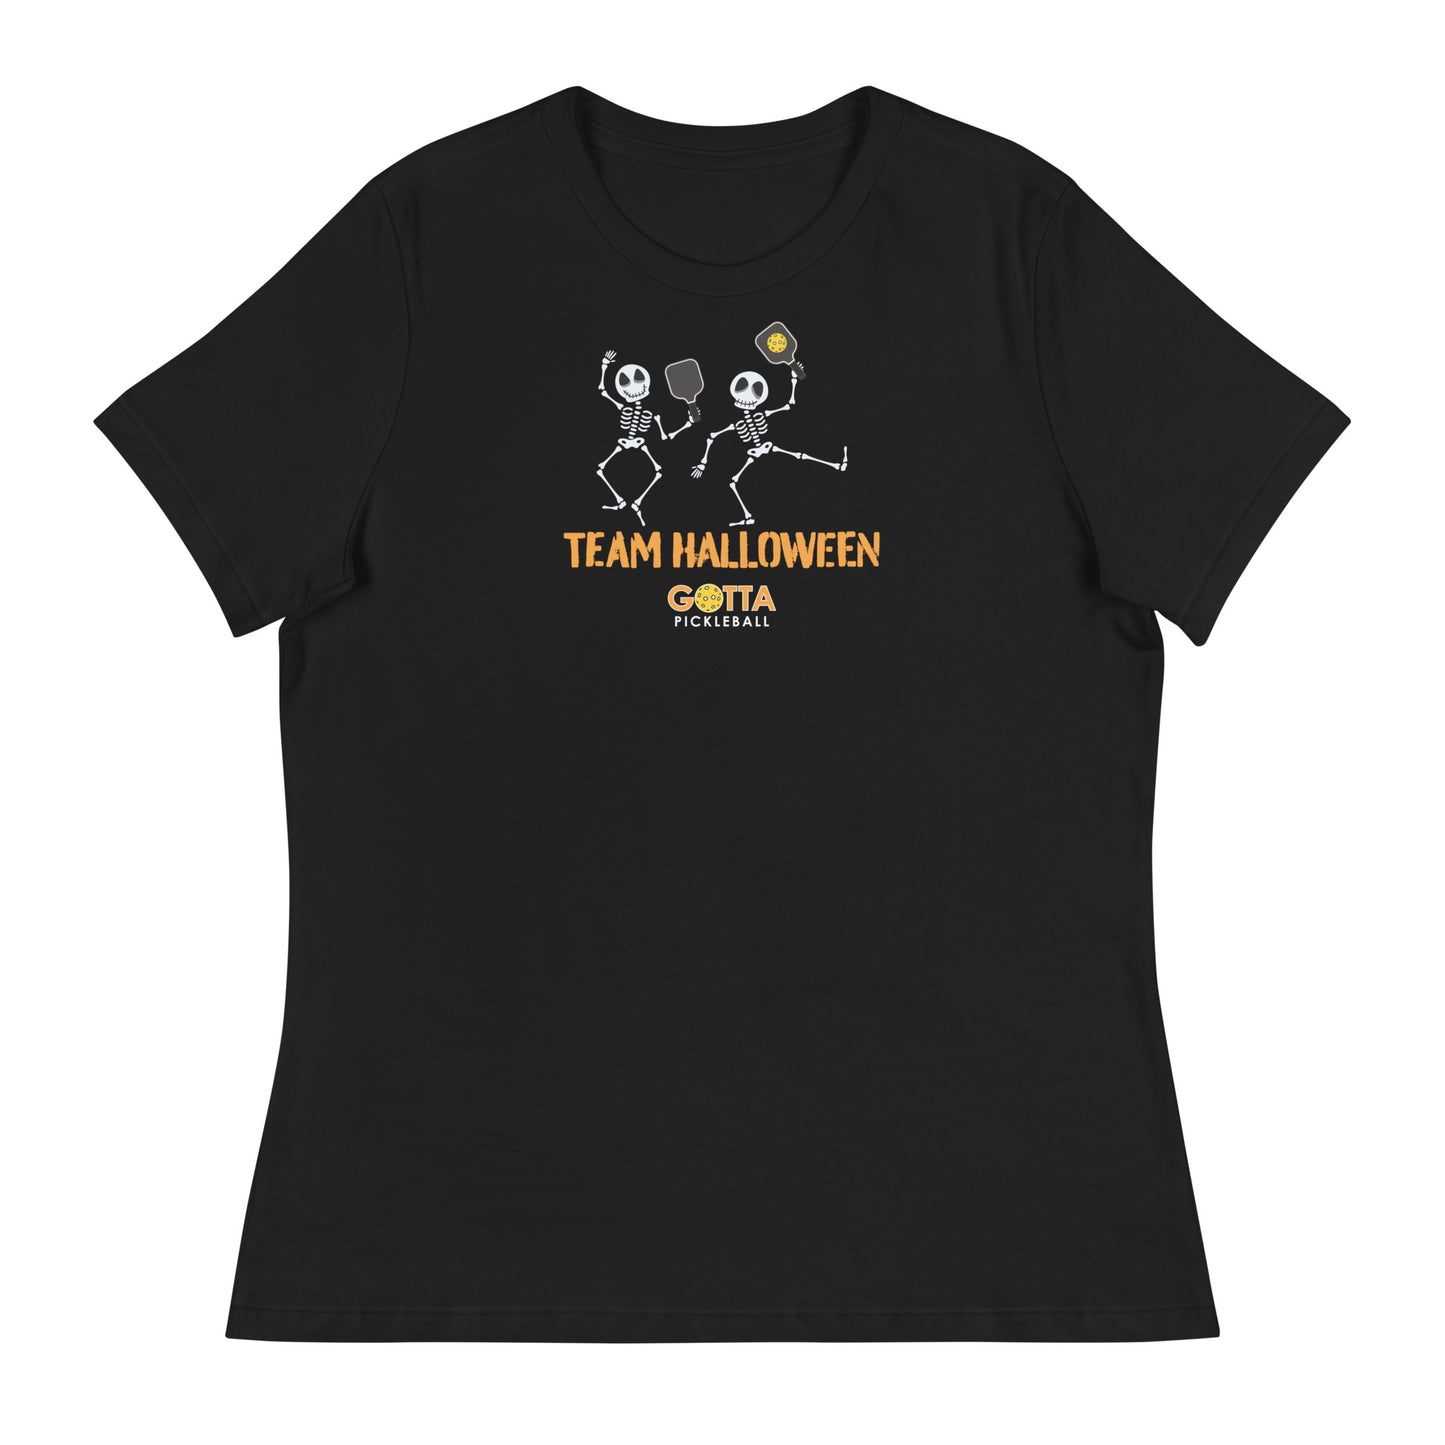 Women's T-Shirt RELAXED FIT: TEAM HALLOWEEN SKELETONS (more colors)